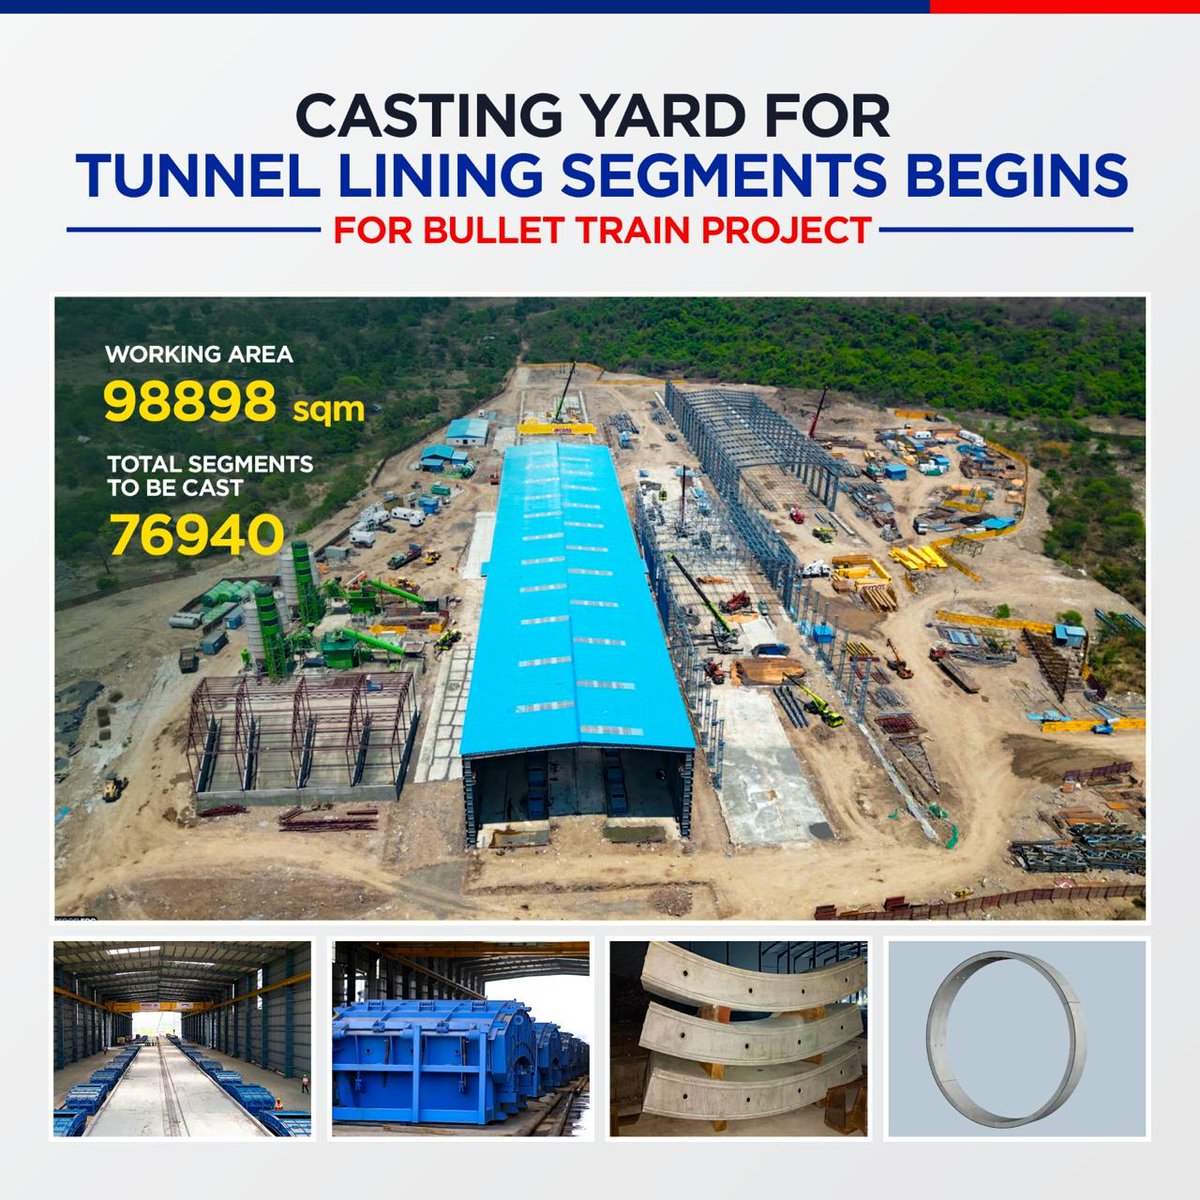 98,898 sqm, specially designed casting yard for the #BulletTrain project in Thane, Maharashtra!

Here, more than 76,000 segments for 7,441 rings will be made for the underground tunnel.